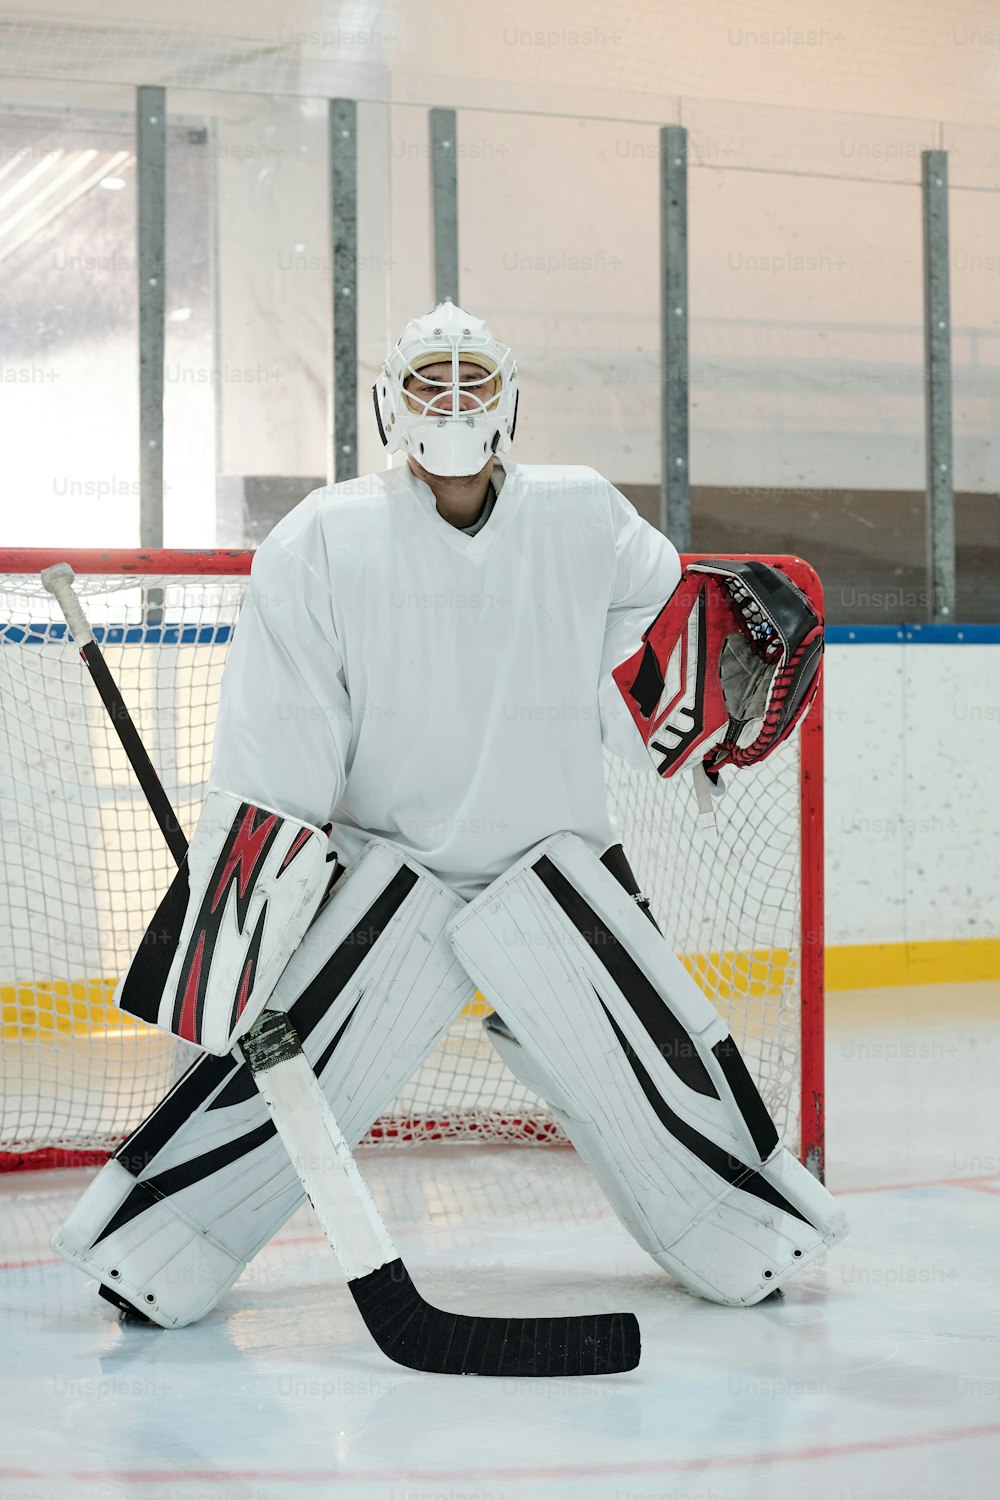 Contemporary hockey player in sports uniform, protective helmet and gloves holding stick while standing on rink against net and waiting for puck